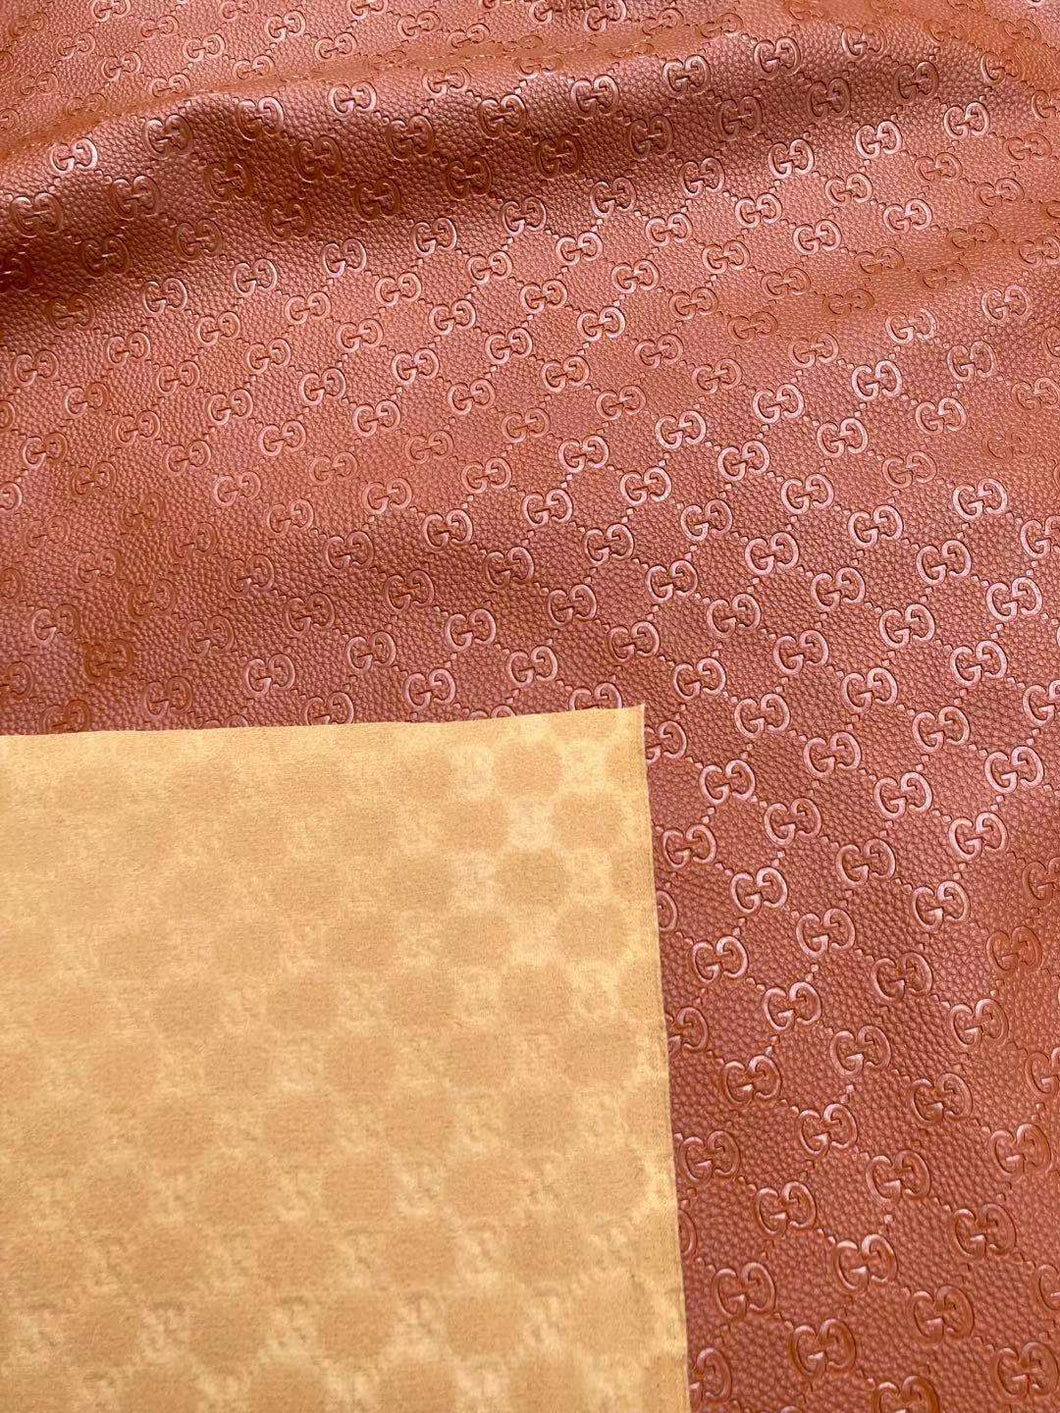 Soft Brown Gucci Leather for Car Upholstery